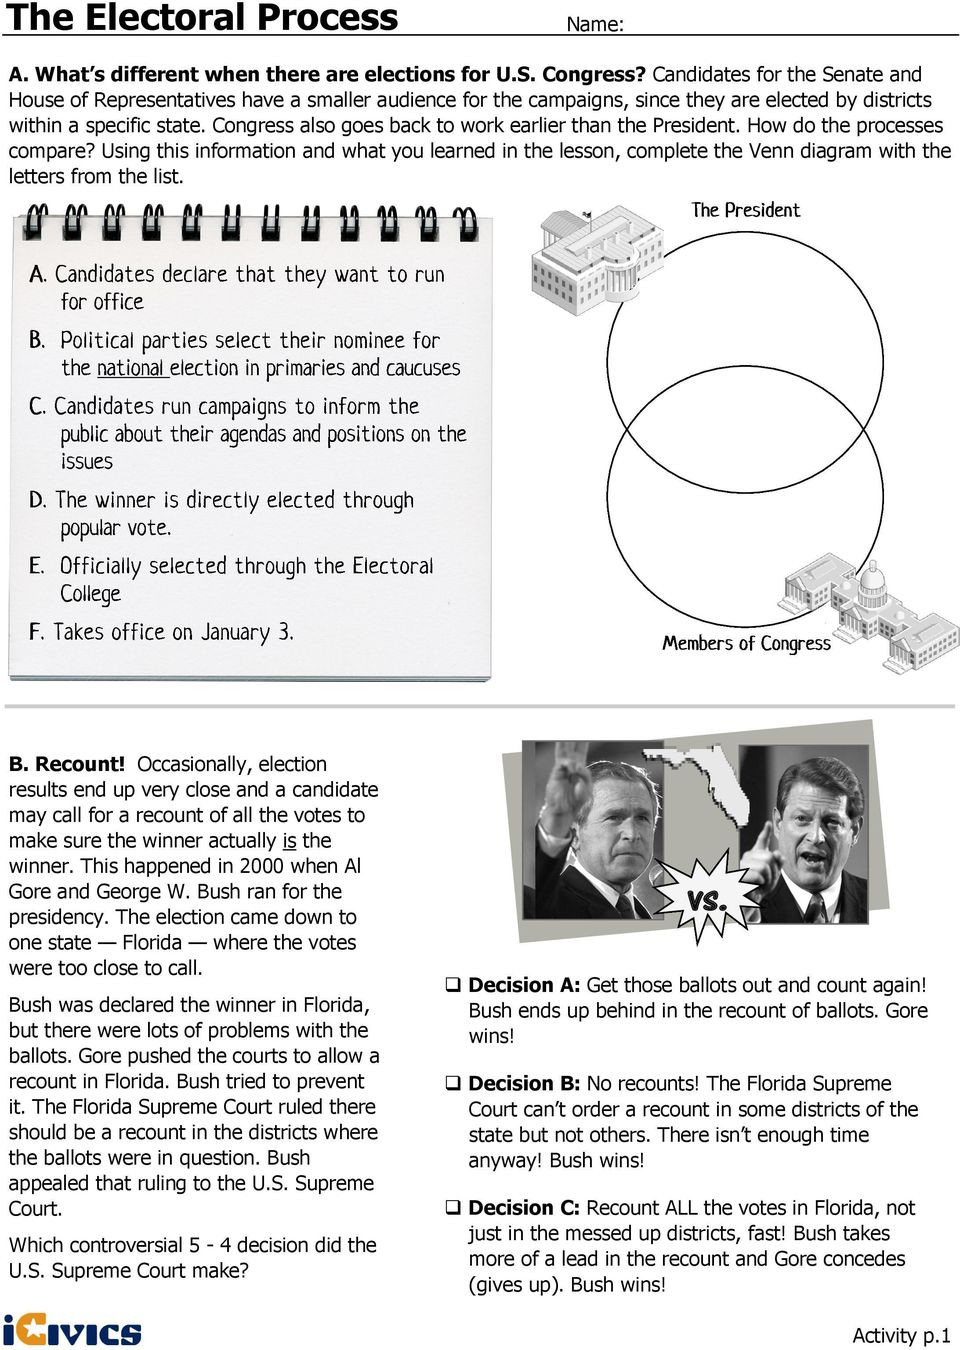 The Electoral Process Worksheet the Electoral Process Step by Step the Worksheet Activity